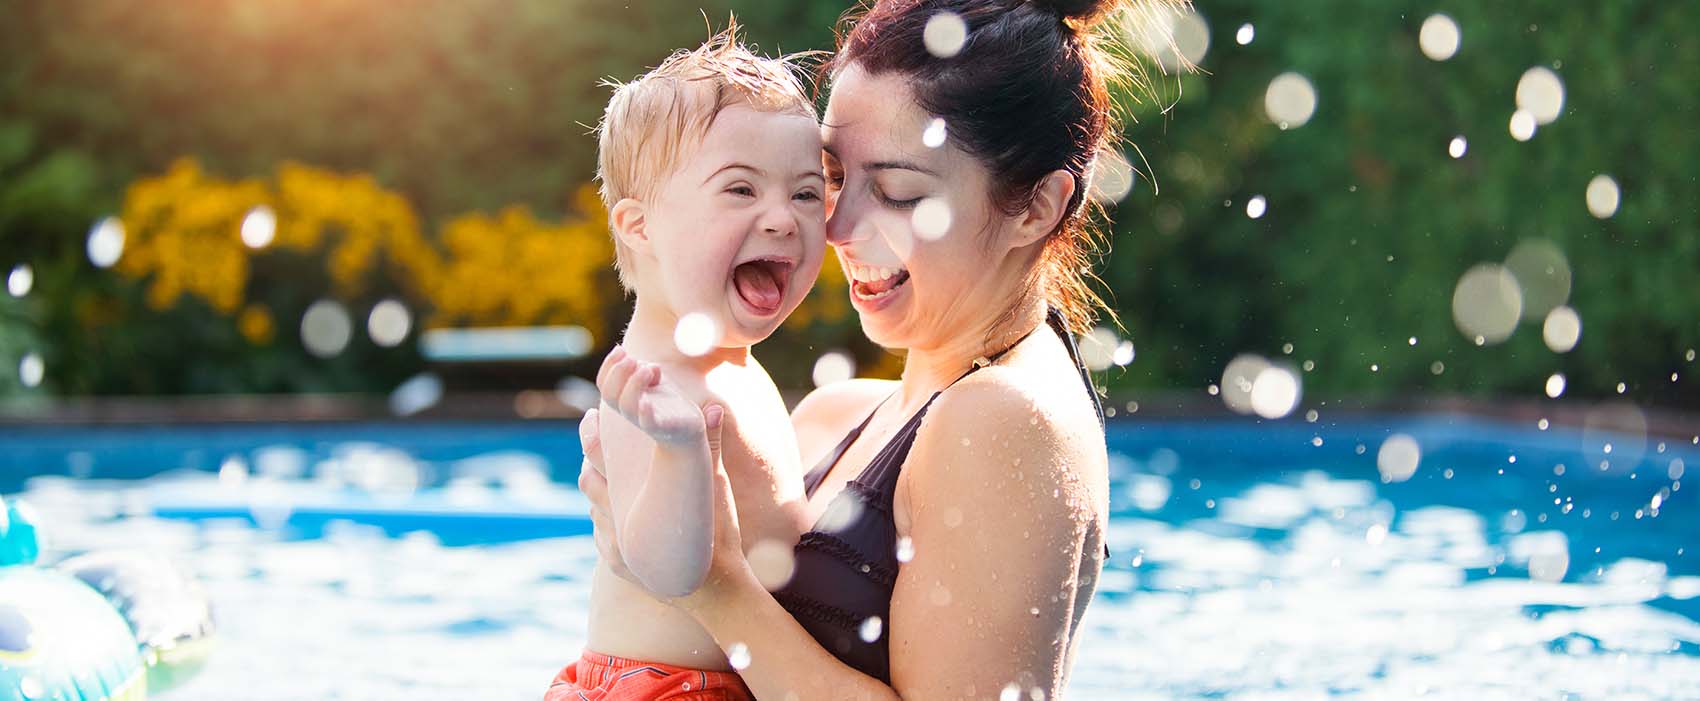 Little boy having fun in the swimming pool with his mother